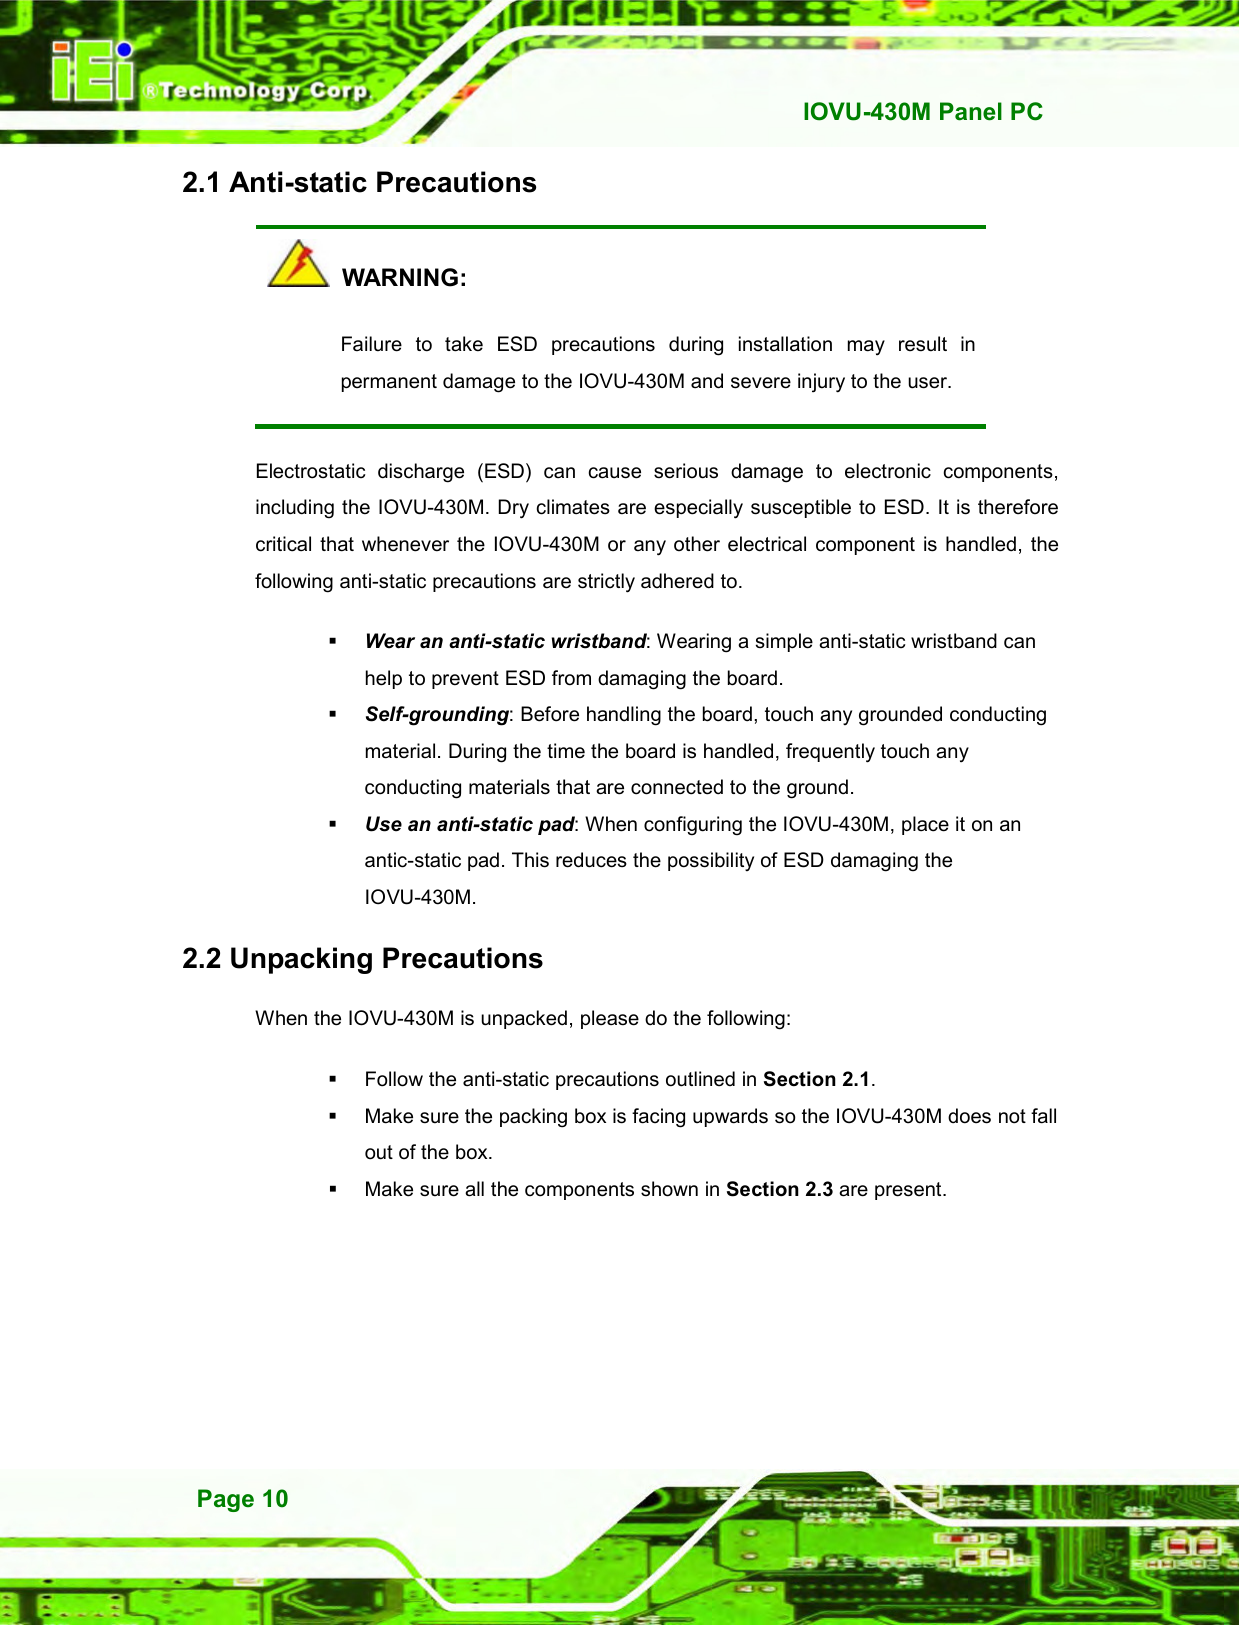   IOVU-430M Panel PC Page 10 2.1 Anti-static Precautions   WARNING: Failure  to  take  ESD  precautions  during  installation  may  result  in permanent damage to the IOVU-430M and severe injury to the user. Electrostatic  discharge  (ESD)  can  cause  serious  damage  to  electronic  components, including the IOVU-430M. Dry climates are especially susceptible to ESD. It is therefore critical  that whenever the  IOVU-430M or  any other electrical component is  handled, the following anti-static precautions are strictly adhered to.  Wear an anti-static wristband: Wearing a simple anti-static wristband can help to prevent ESD from damaging the board.  Self-grounding: Before handling the board, touch any grounded conducting material. During the time the board is handled, frequently touch any conducting materials that are connected to the ground.  Use an anti-static pad: When configuring the IOVU-430M, place it on an antic-static pad. This reduces the possibility of ESD damaging the IOVU-430M. 2.2 Unpacking Precautions When the IOVU-430M is unpacked, please do the following:   Follow the anti-static precautions outlined in Section 2.1.   Make sure the packing box is facing upwards so the IOVU-430M does not fall out of the box.   Make sure all the components shown in Section 2.3 are present. 